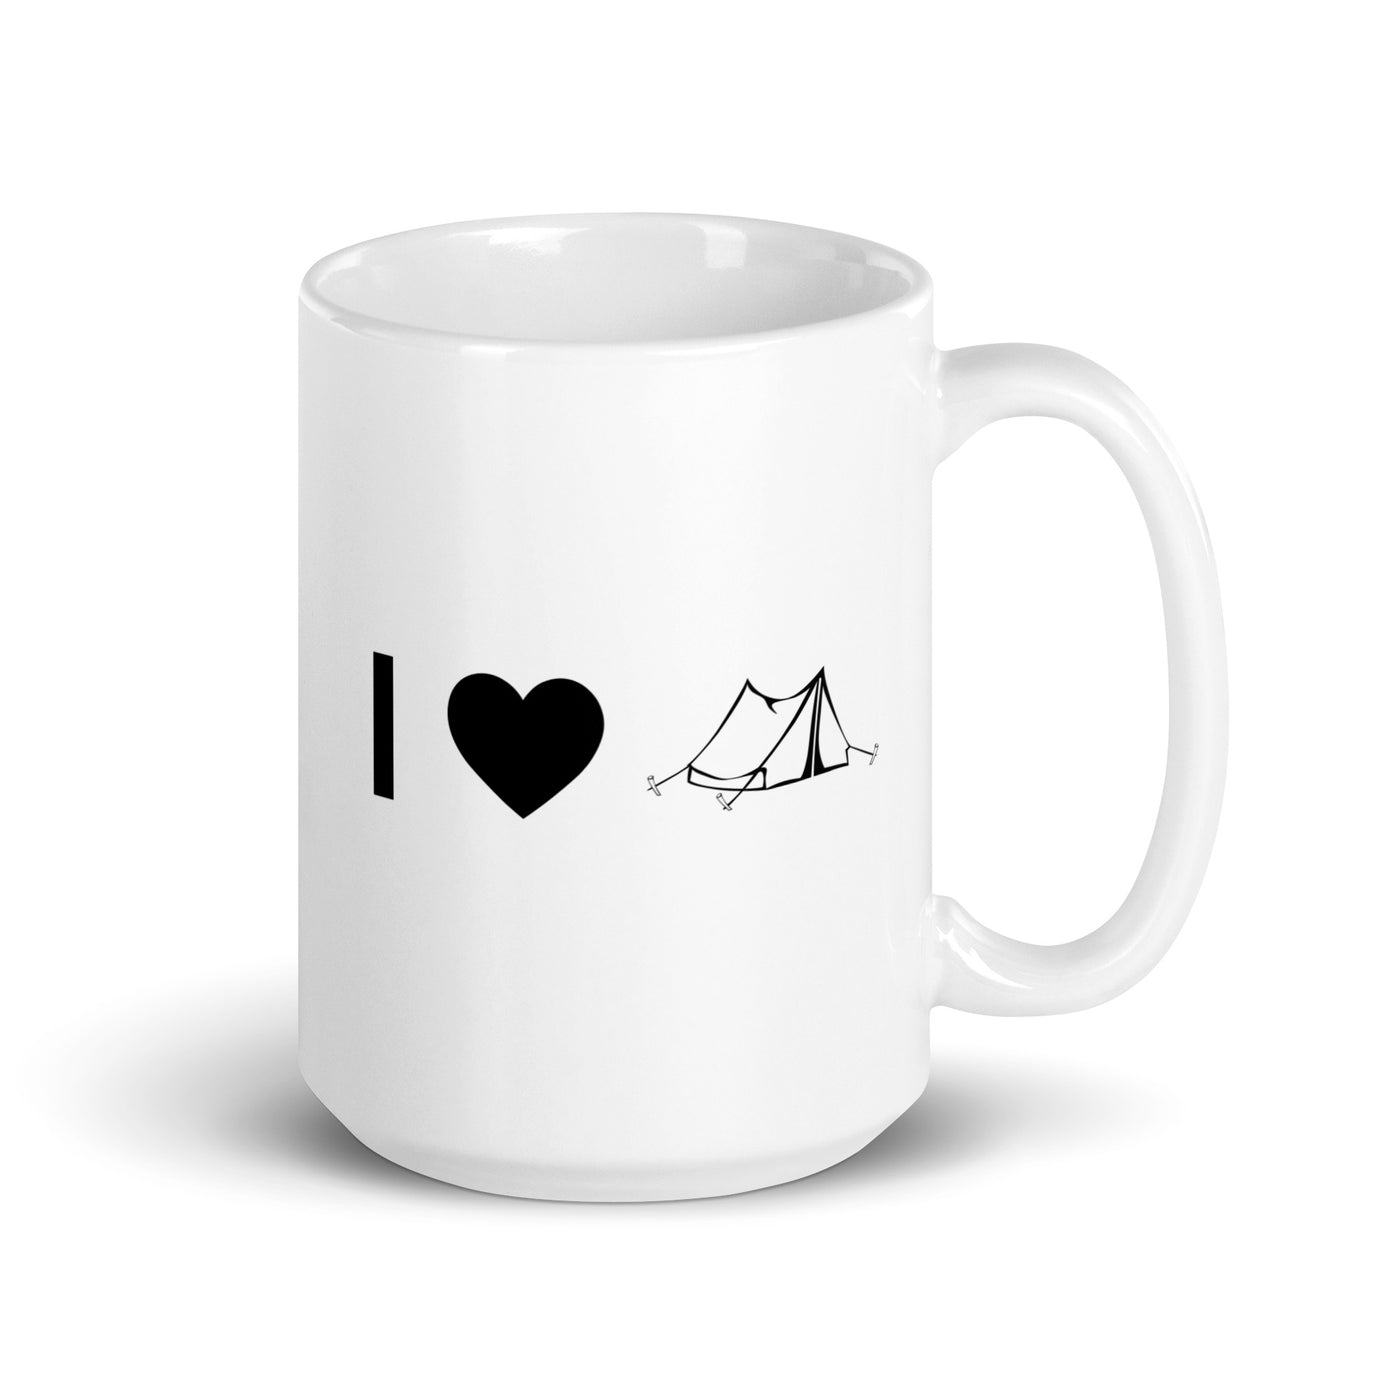 I Heart And Camping Tent - Tasse camping 15oz